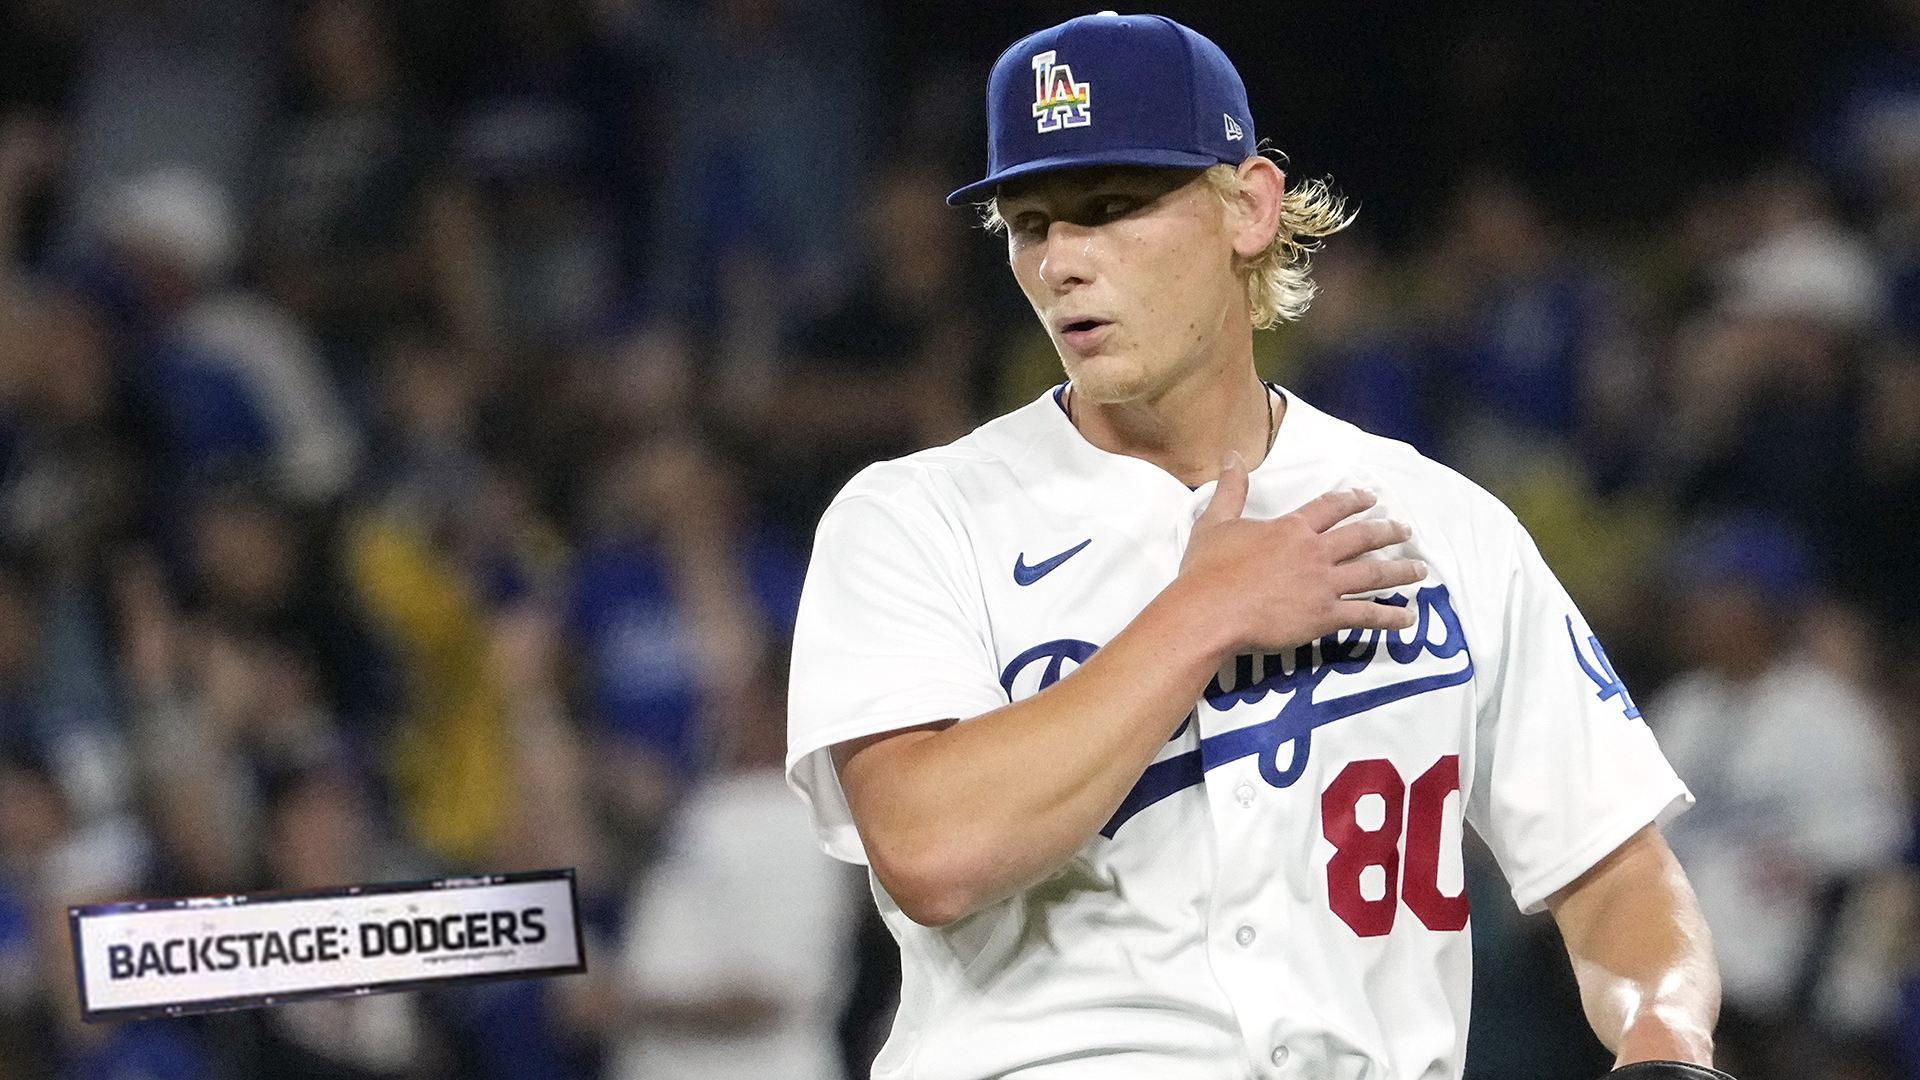 SportsNet LA on X: You better get used to this blue, I'm just telling you  it's weird at first. 🤣 Go behind-the-scenes of @treavturner's Dodger  Stadium arrival on tonight's all-new #BackstageDodgers after